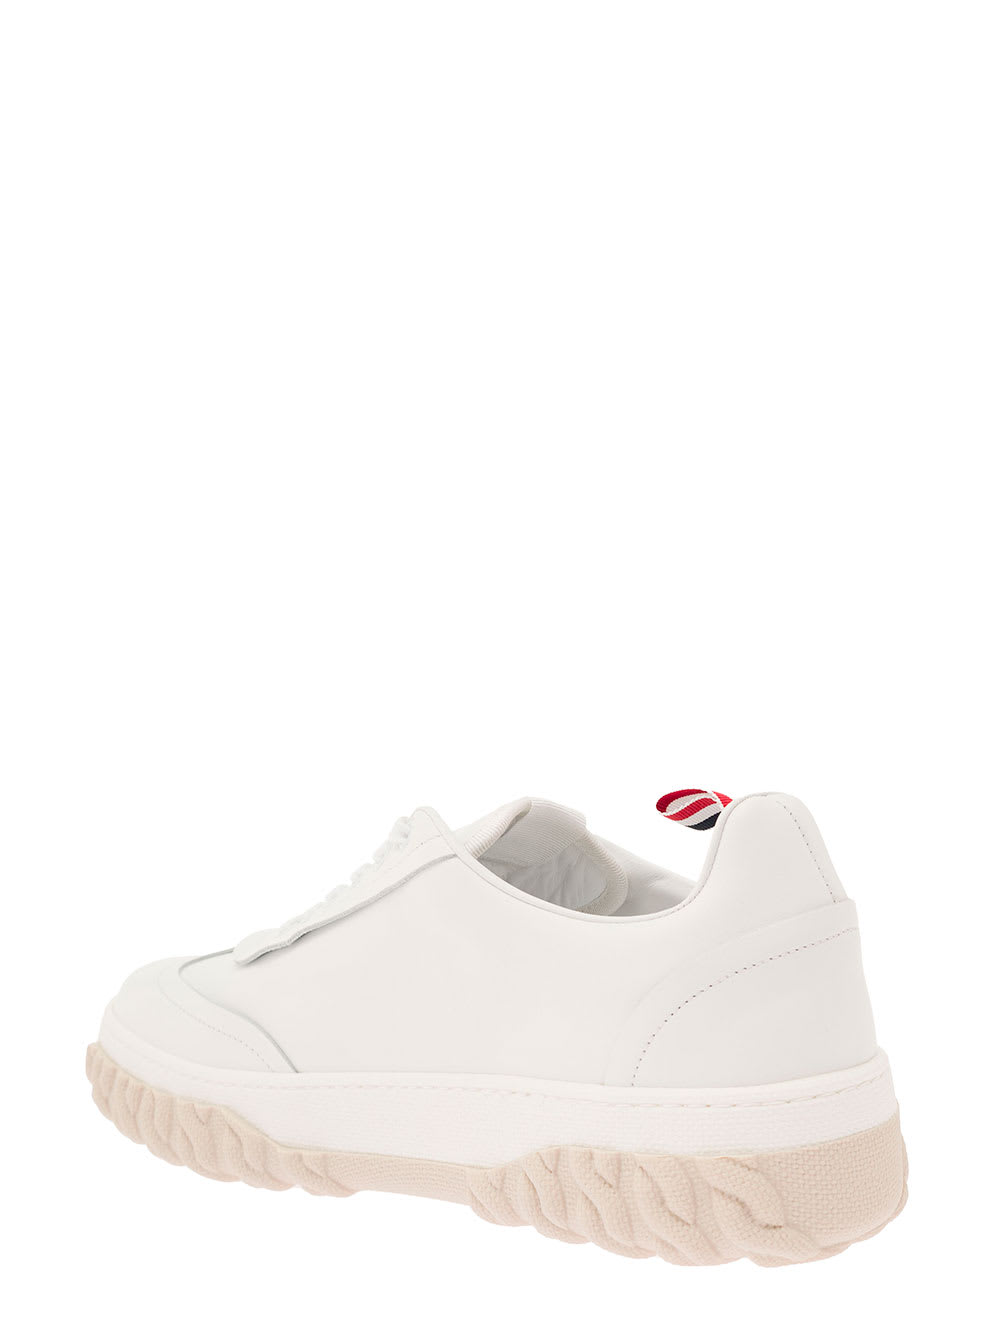 Shop Thom Browne Field Shoe W/ Raw Edge On Cable Knit Sole In Vitello Calf Leather In White